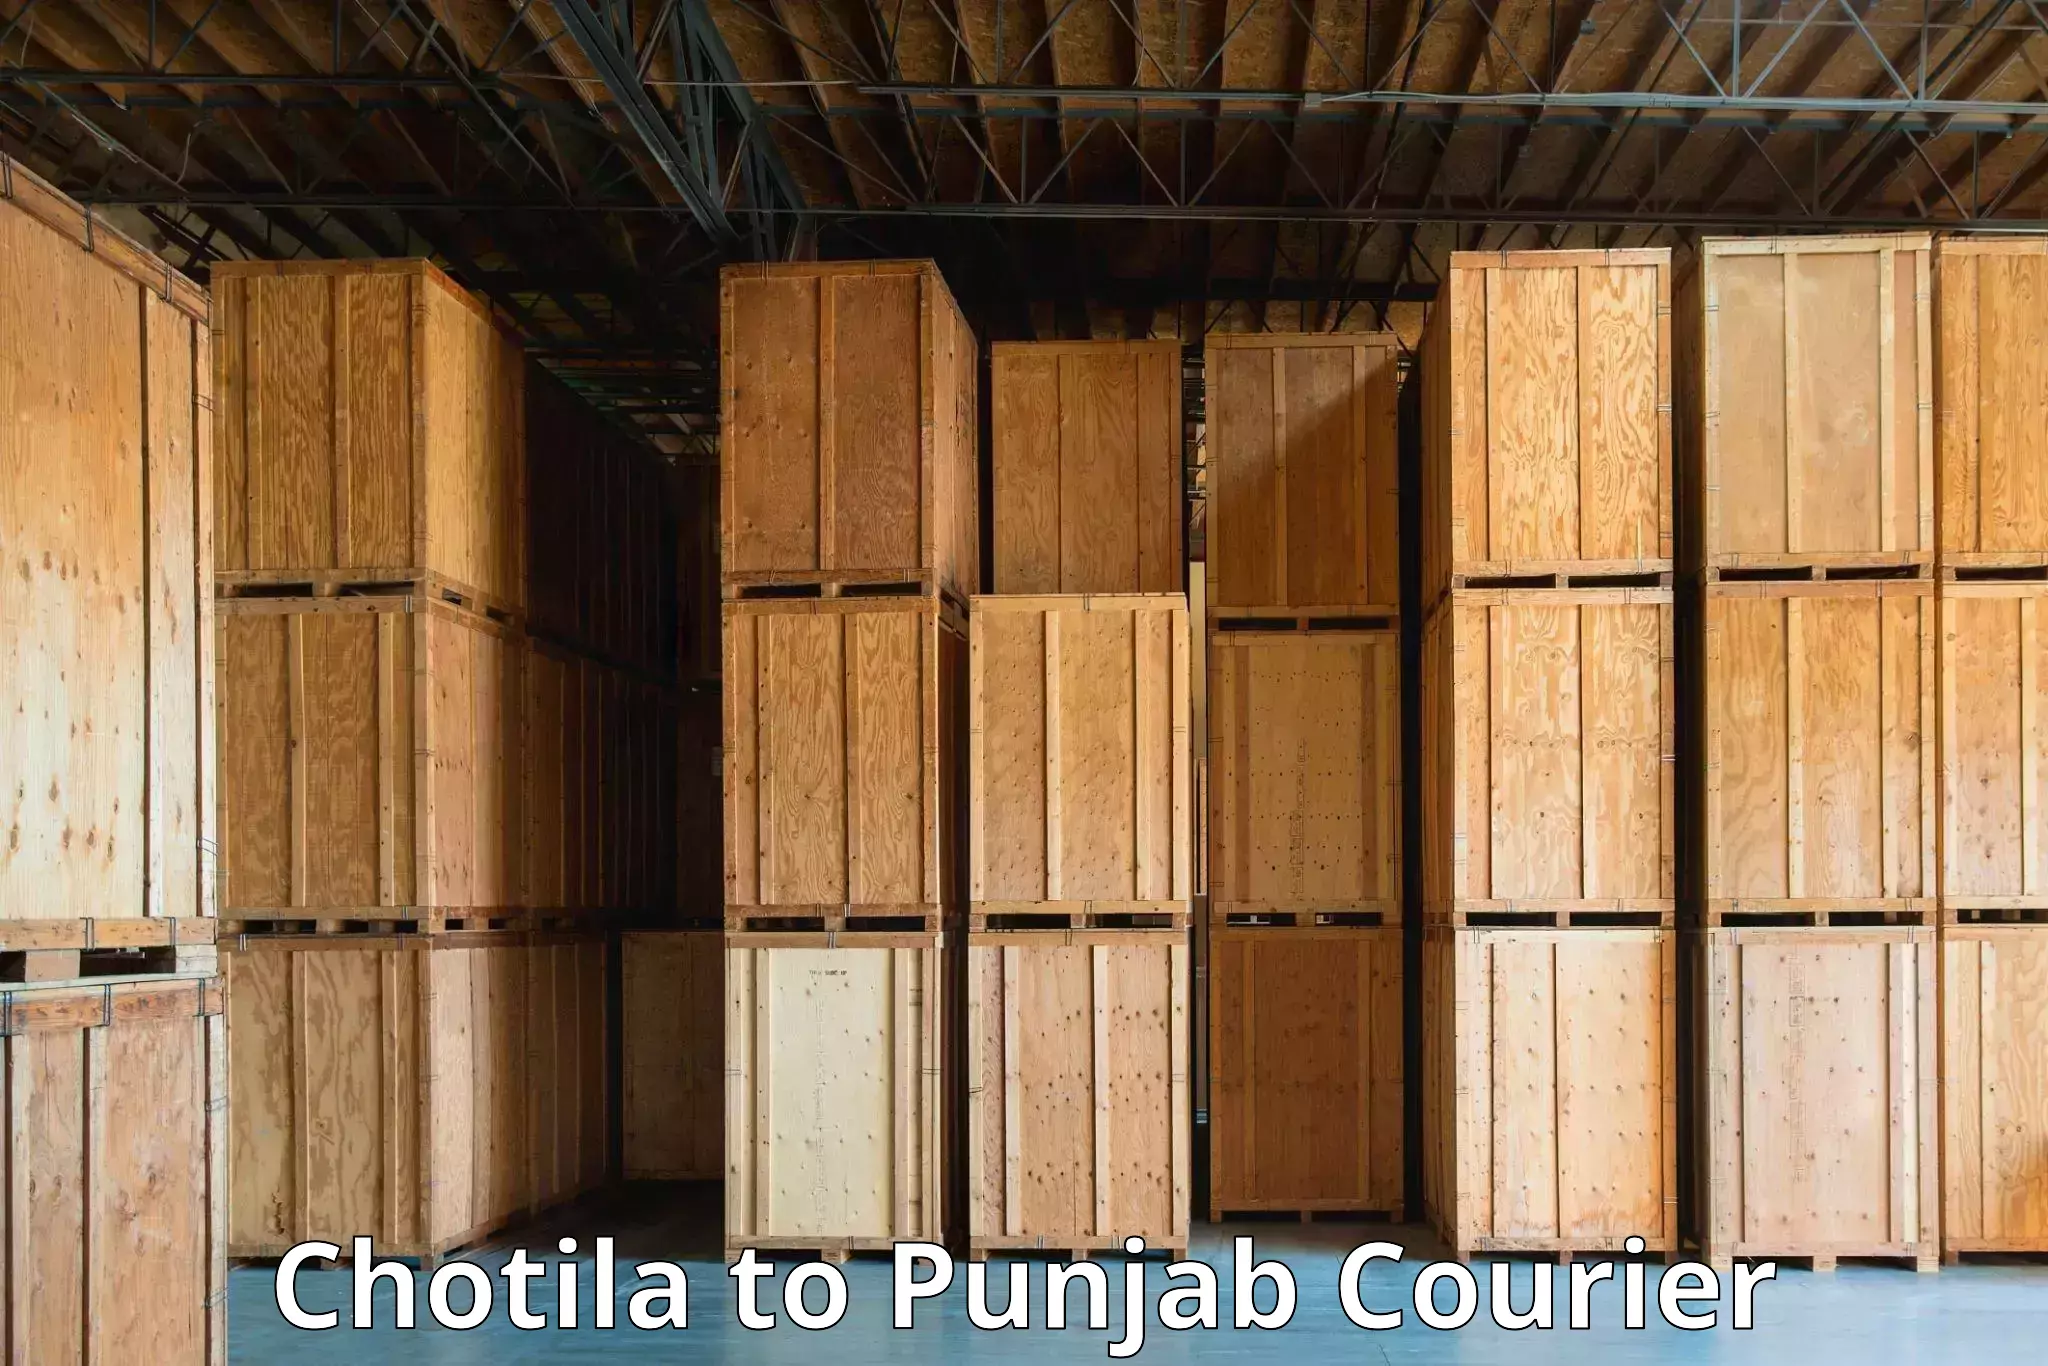 Rural area delivery Chotila to Mohali